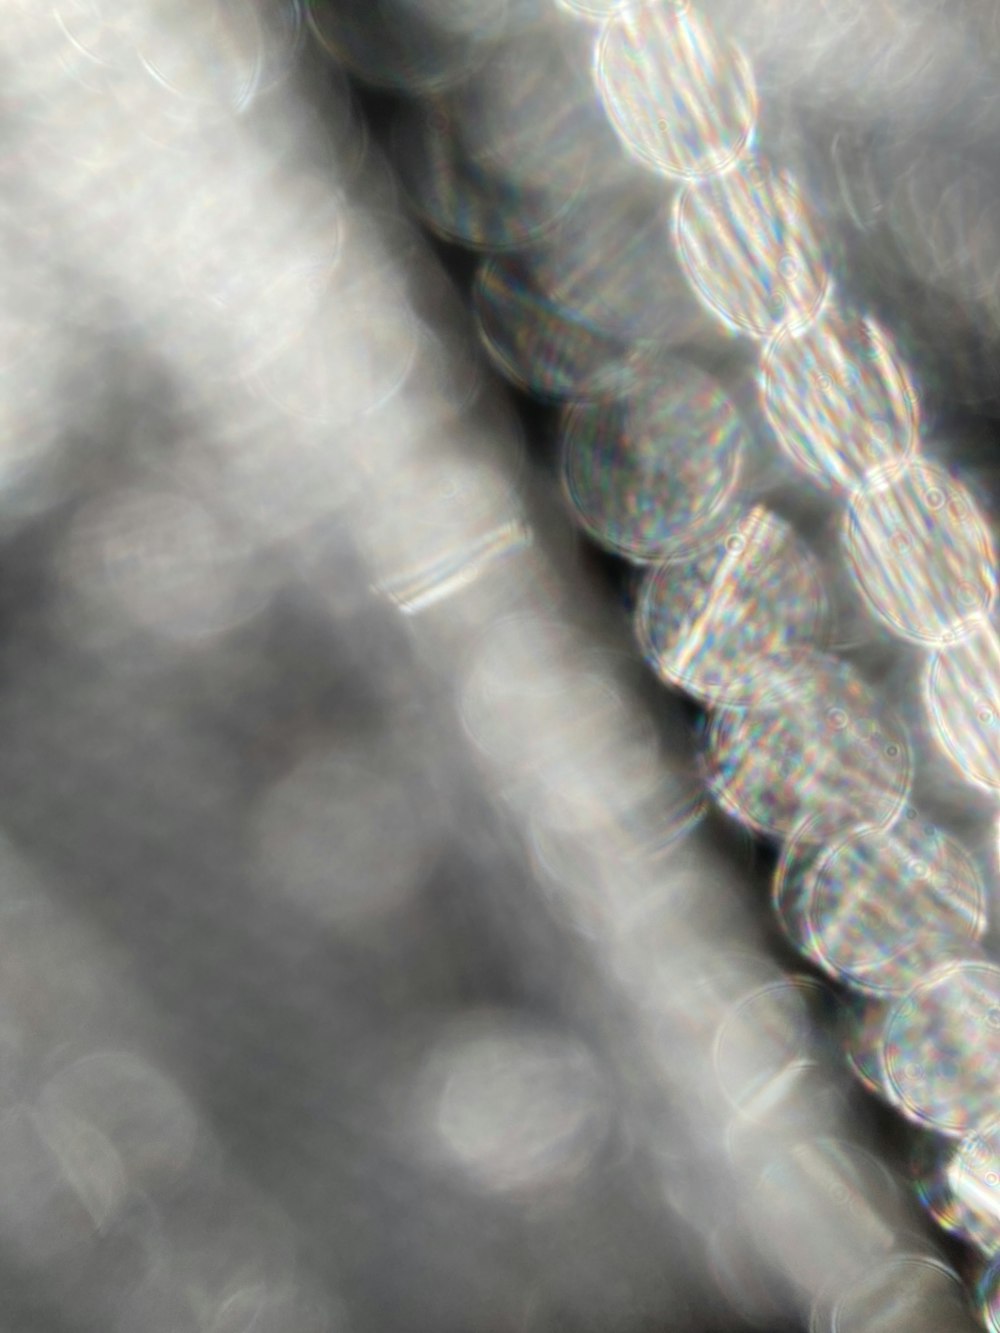 a close up of a metal object with a blurry background